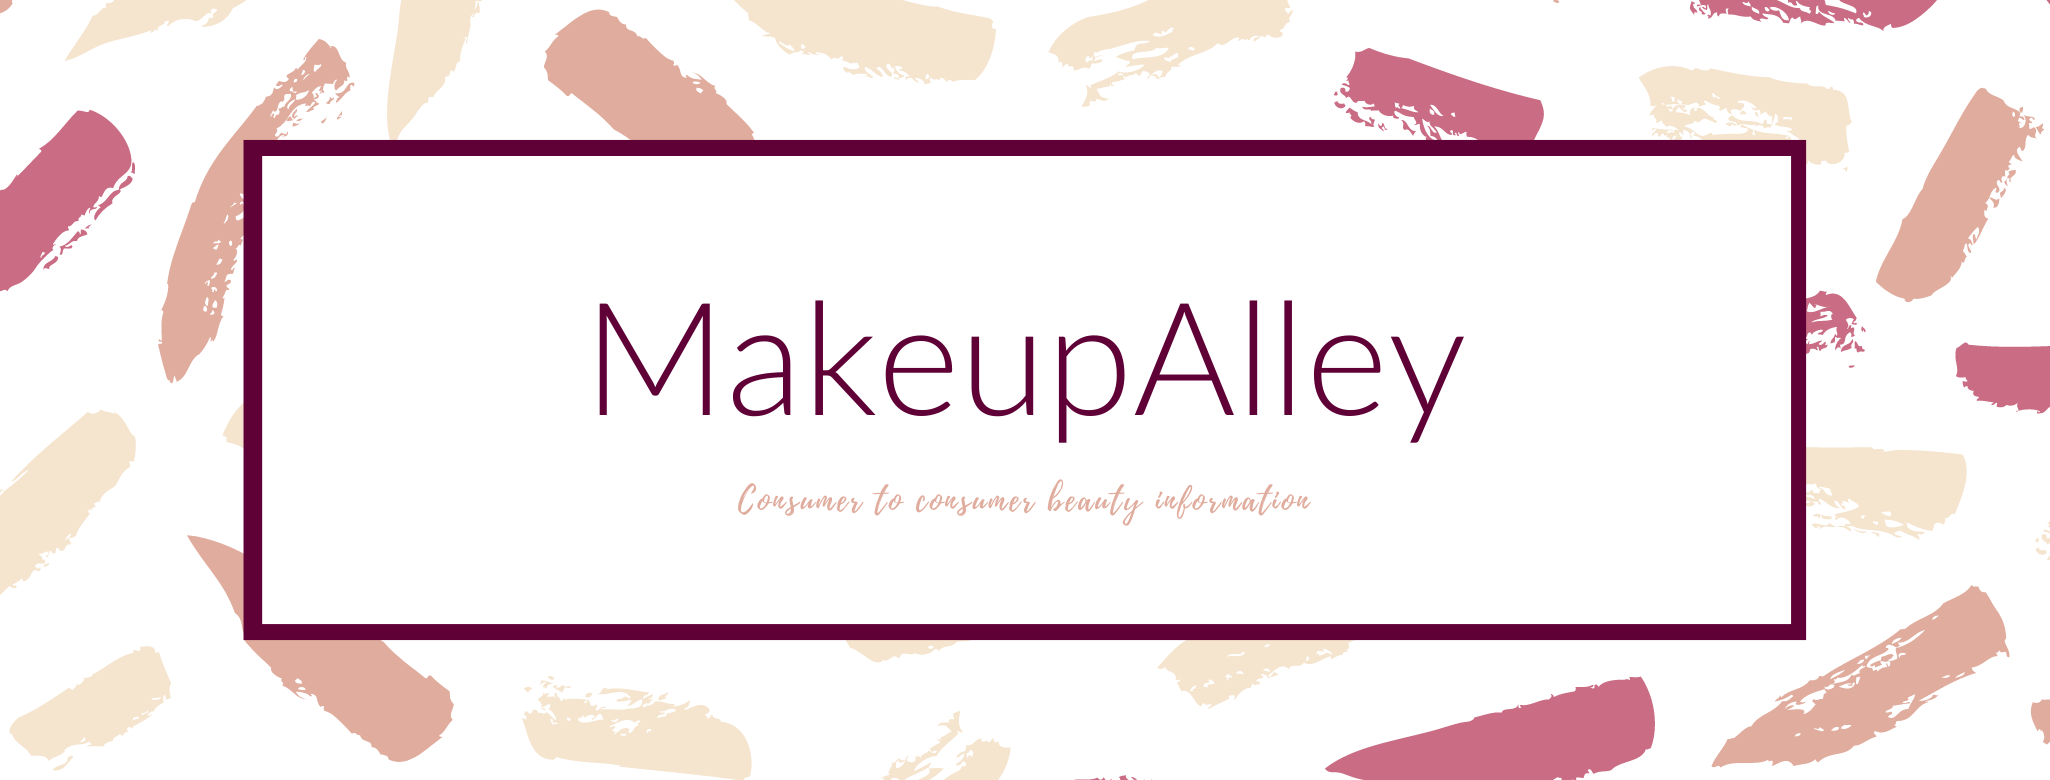 MakeupAlley.png